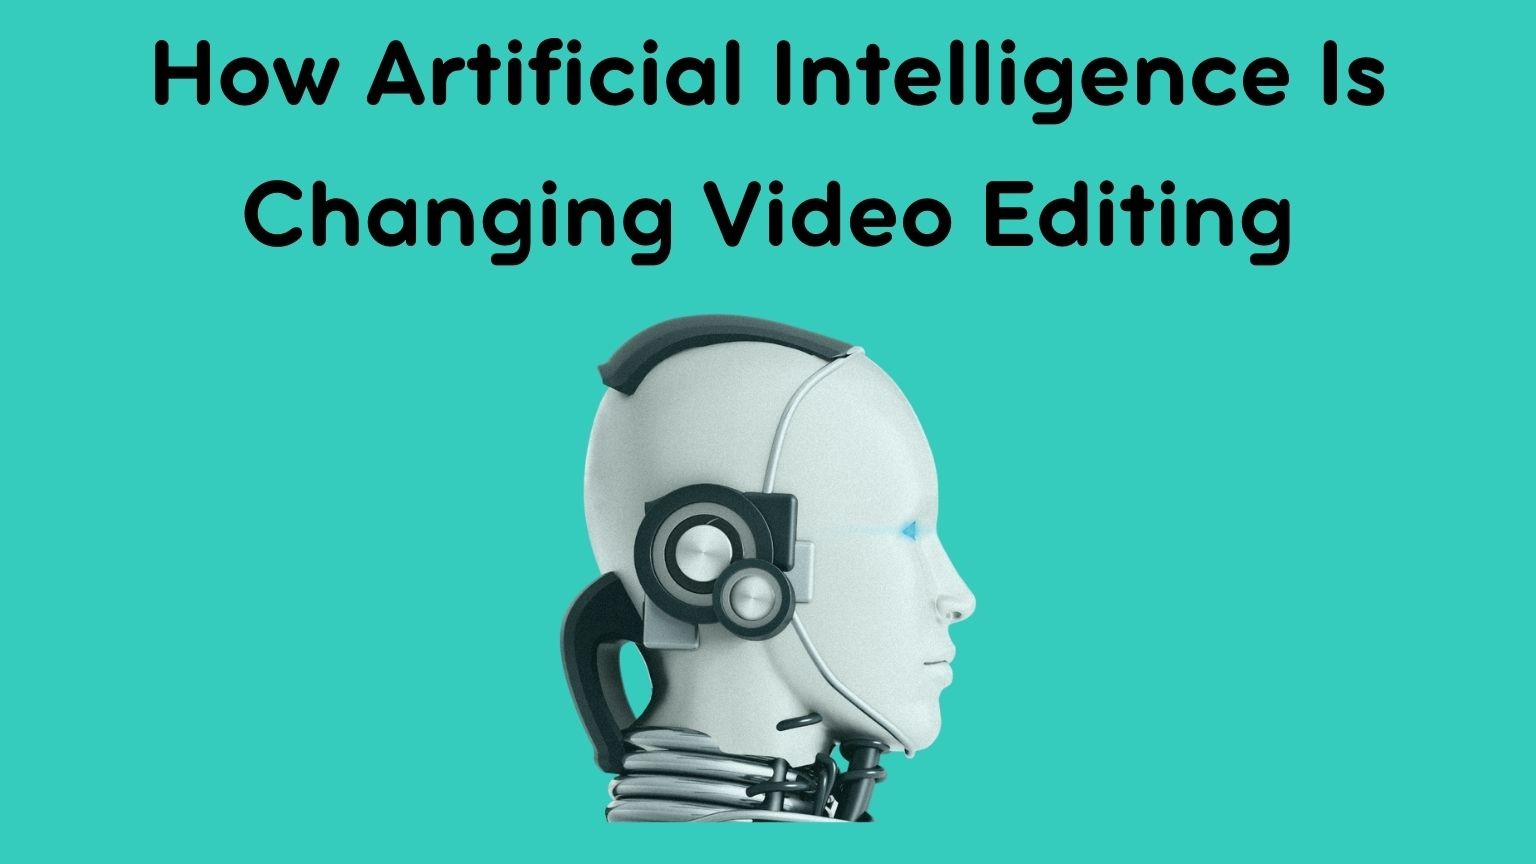 How Artificial Intelligence Is Changing Video Editing The Future of Media